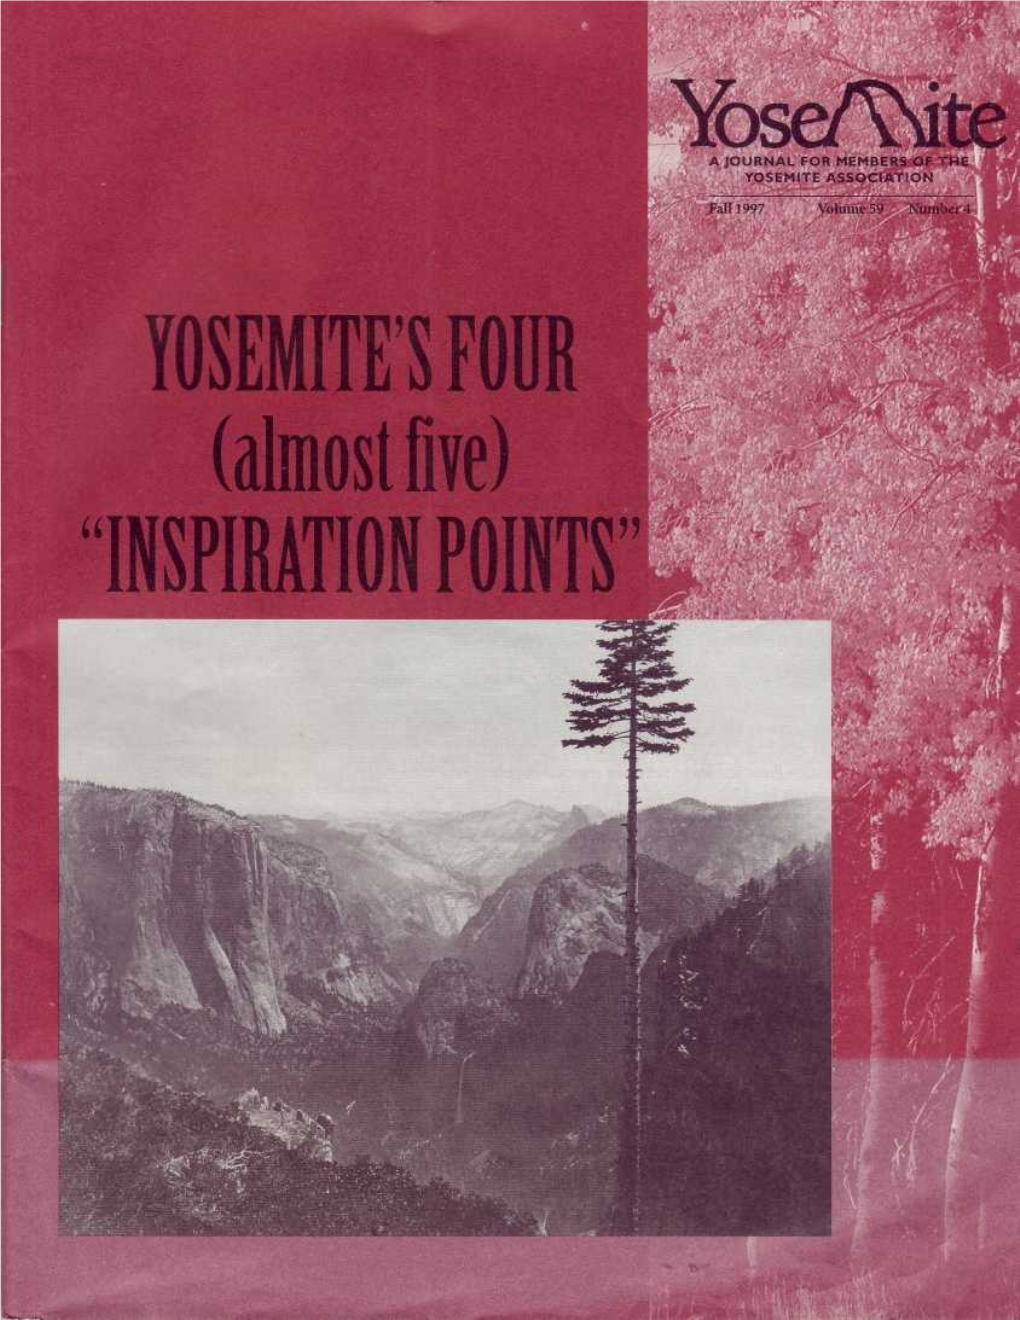 YOSEMITE's FOI1R (Almost Cie) "INSPIRATION POINT